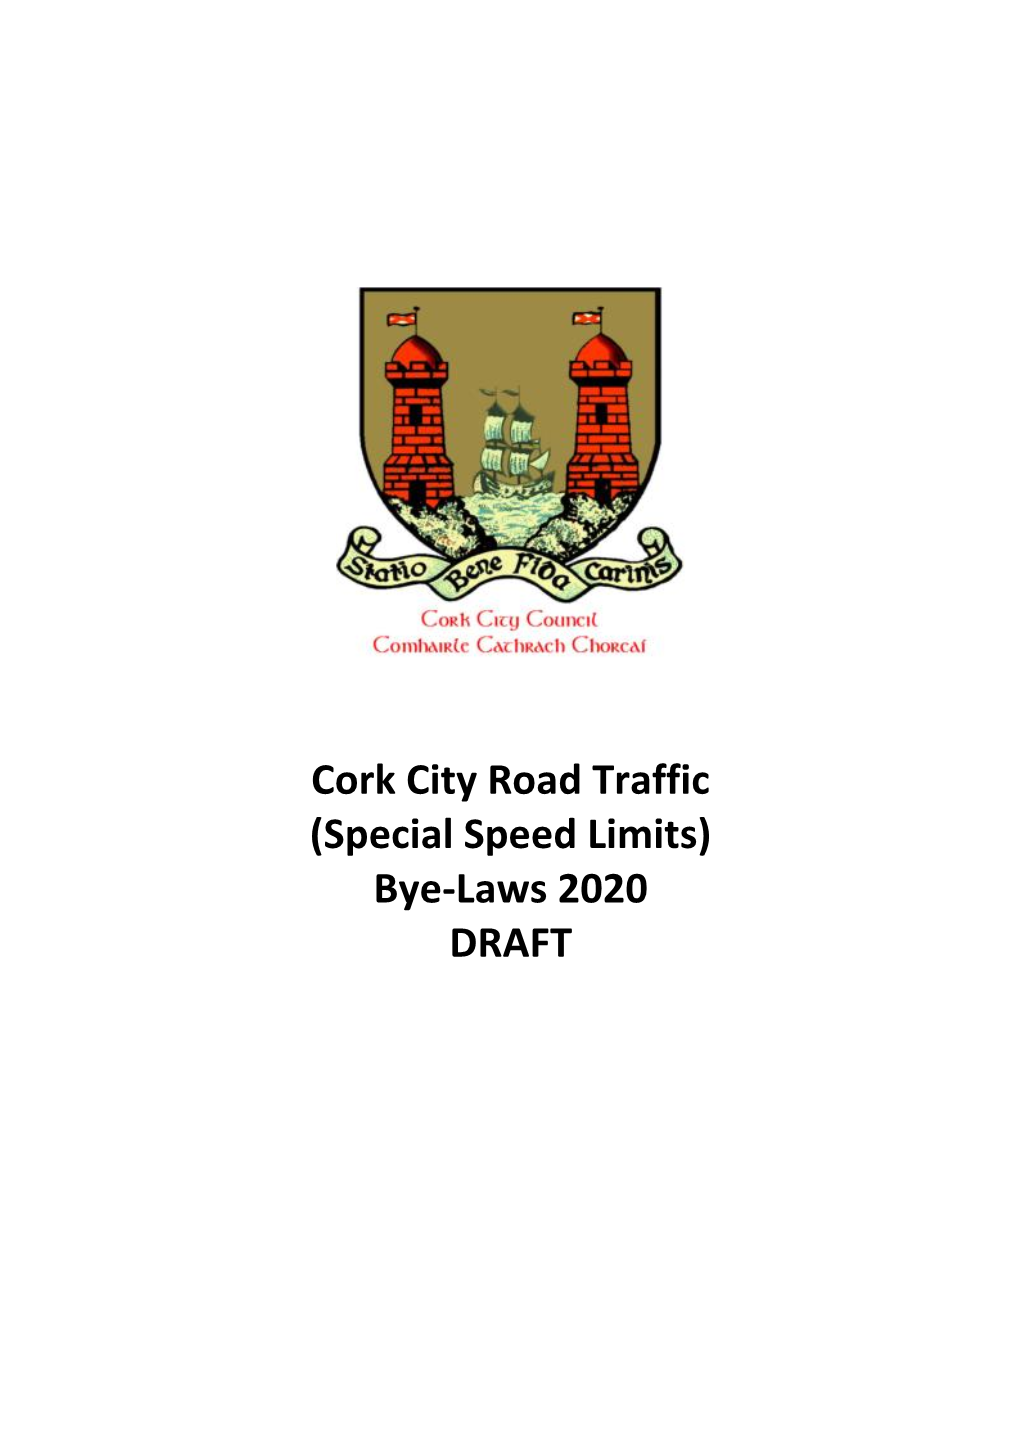 Cork City Road Traffic (Special Speed Limits) Bye-Laws 2020 DRAFT